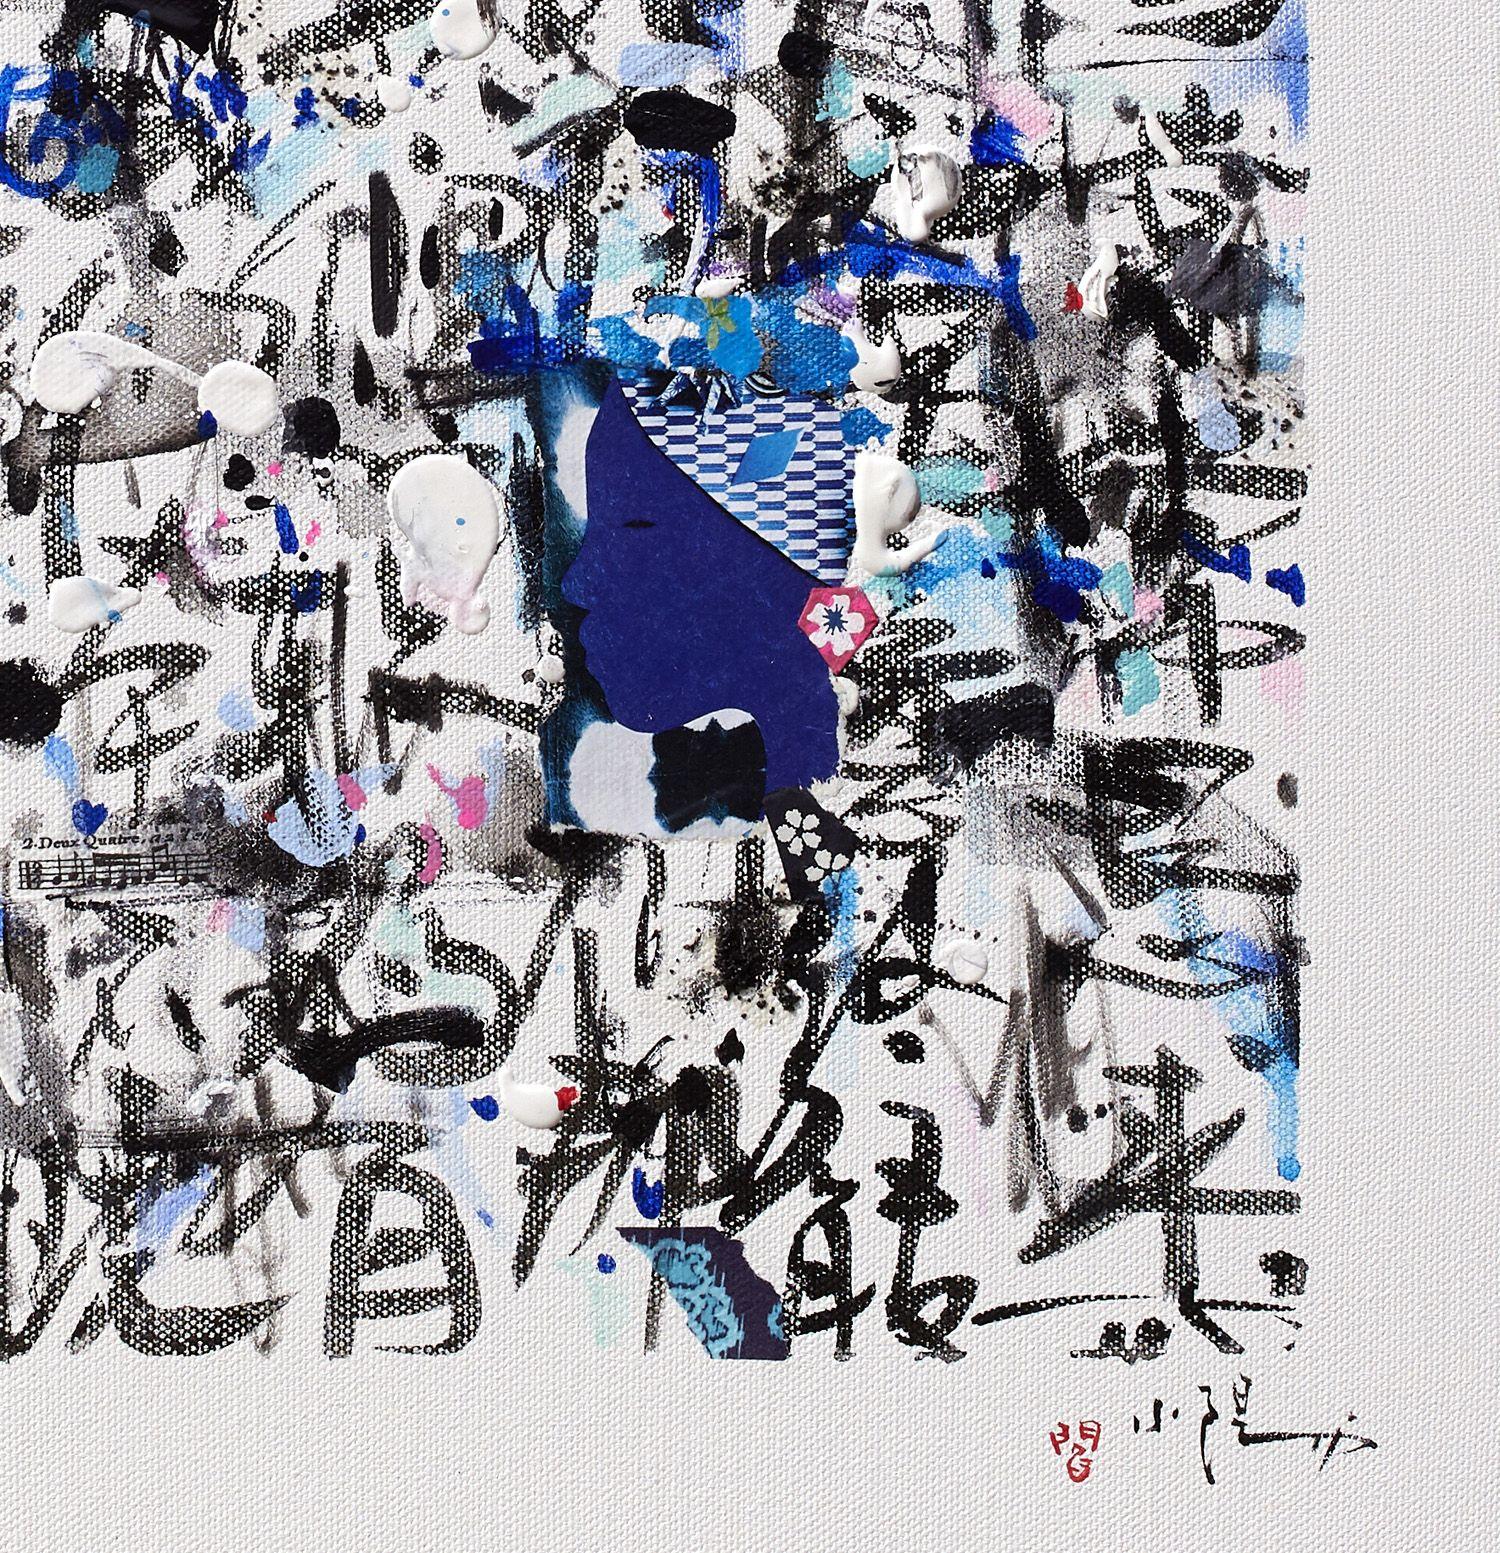 La priÃ¨re bleue - GiclÃce print on canvas, Digital on Canvas - Abstract Print by Xiaoyang Galas